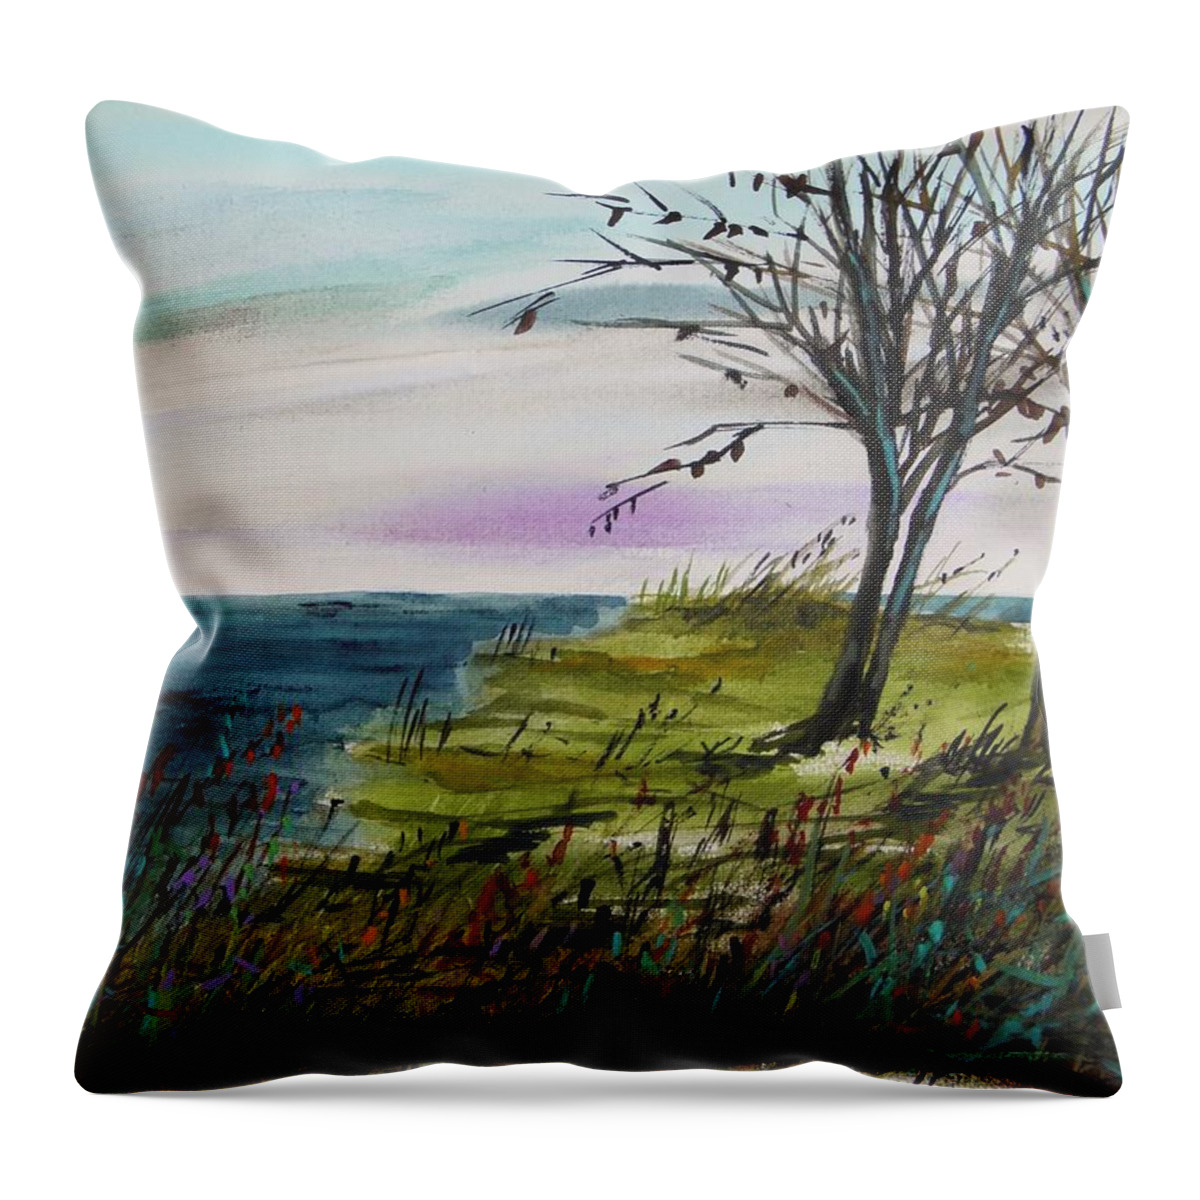 Sea Throw Pillow featuring the painting Quiet Point by John Williams